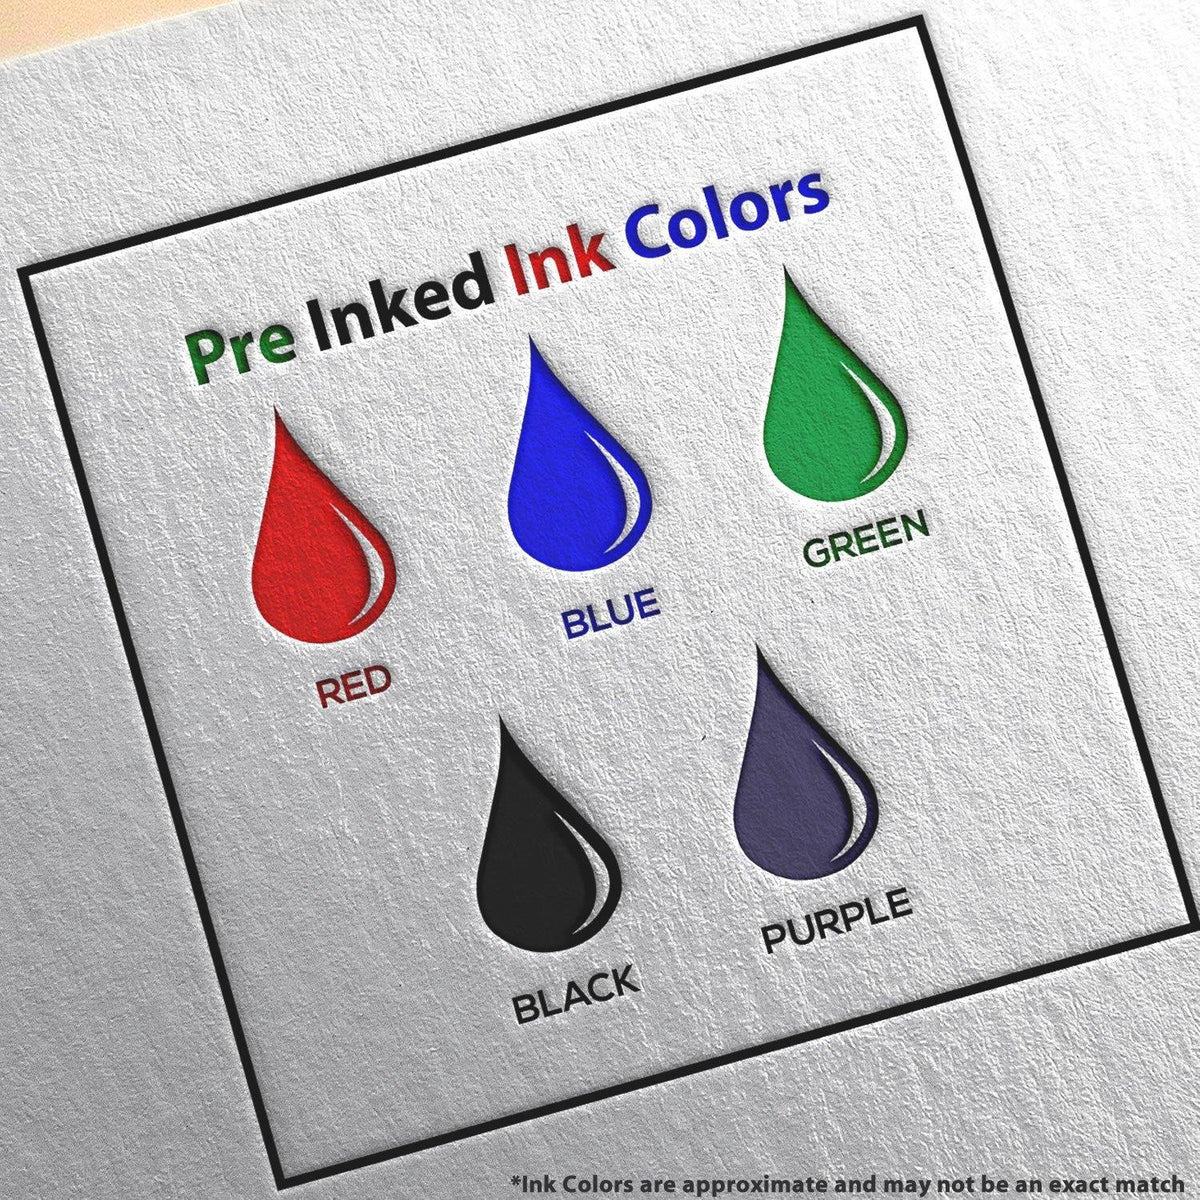 Large Pre-Inked Faxed on Stamp Ink Color Options